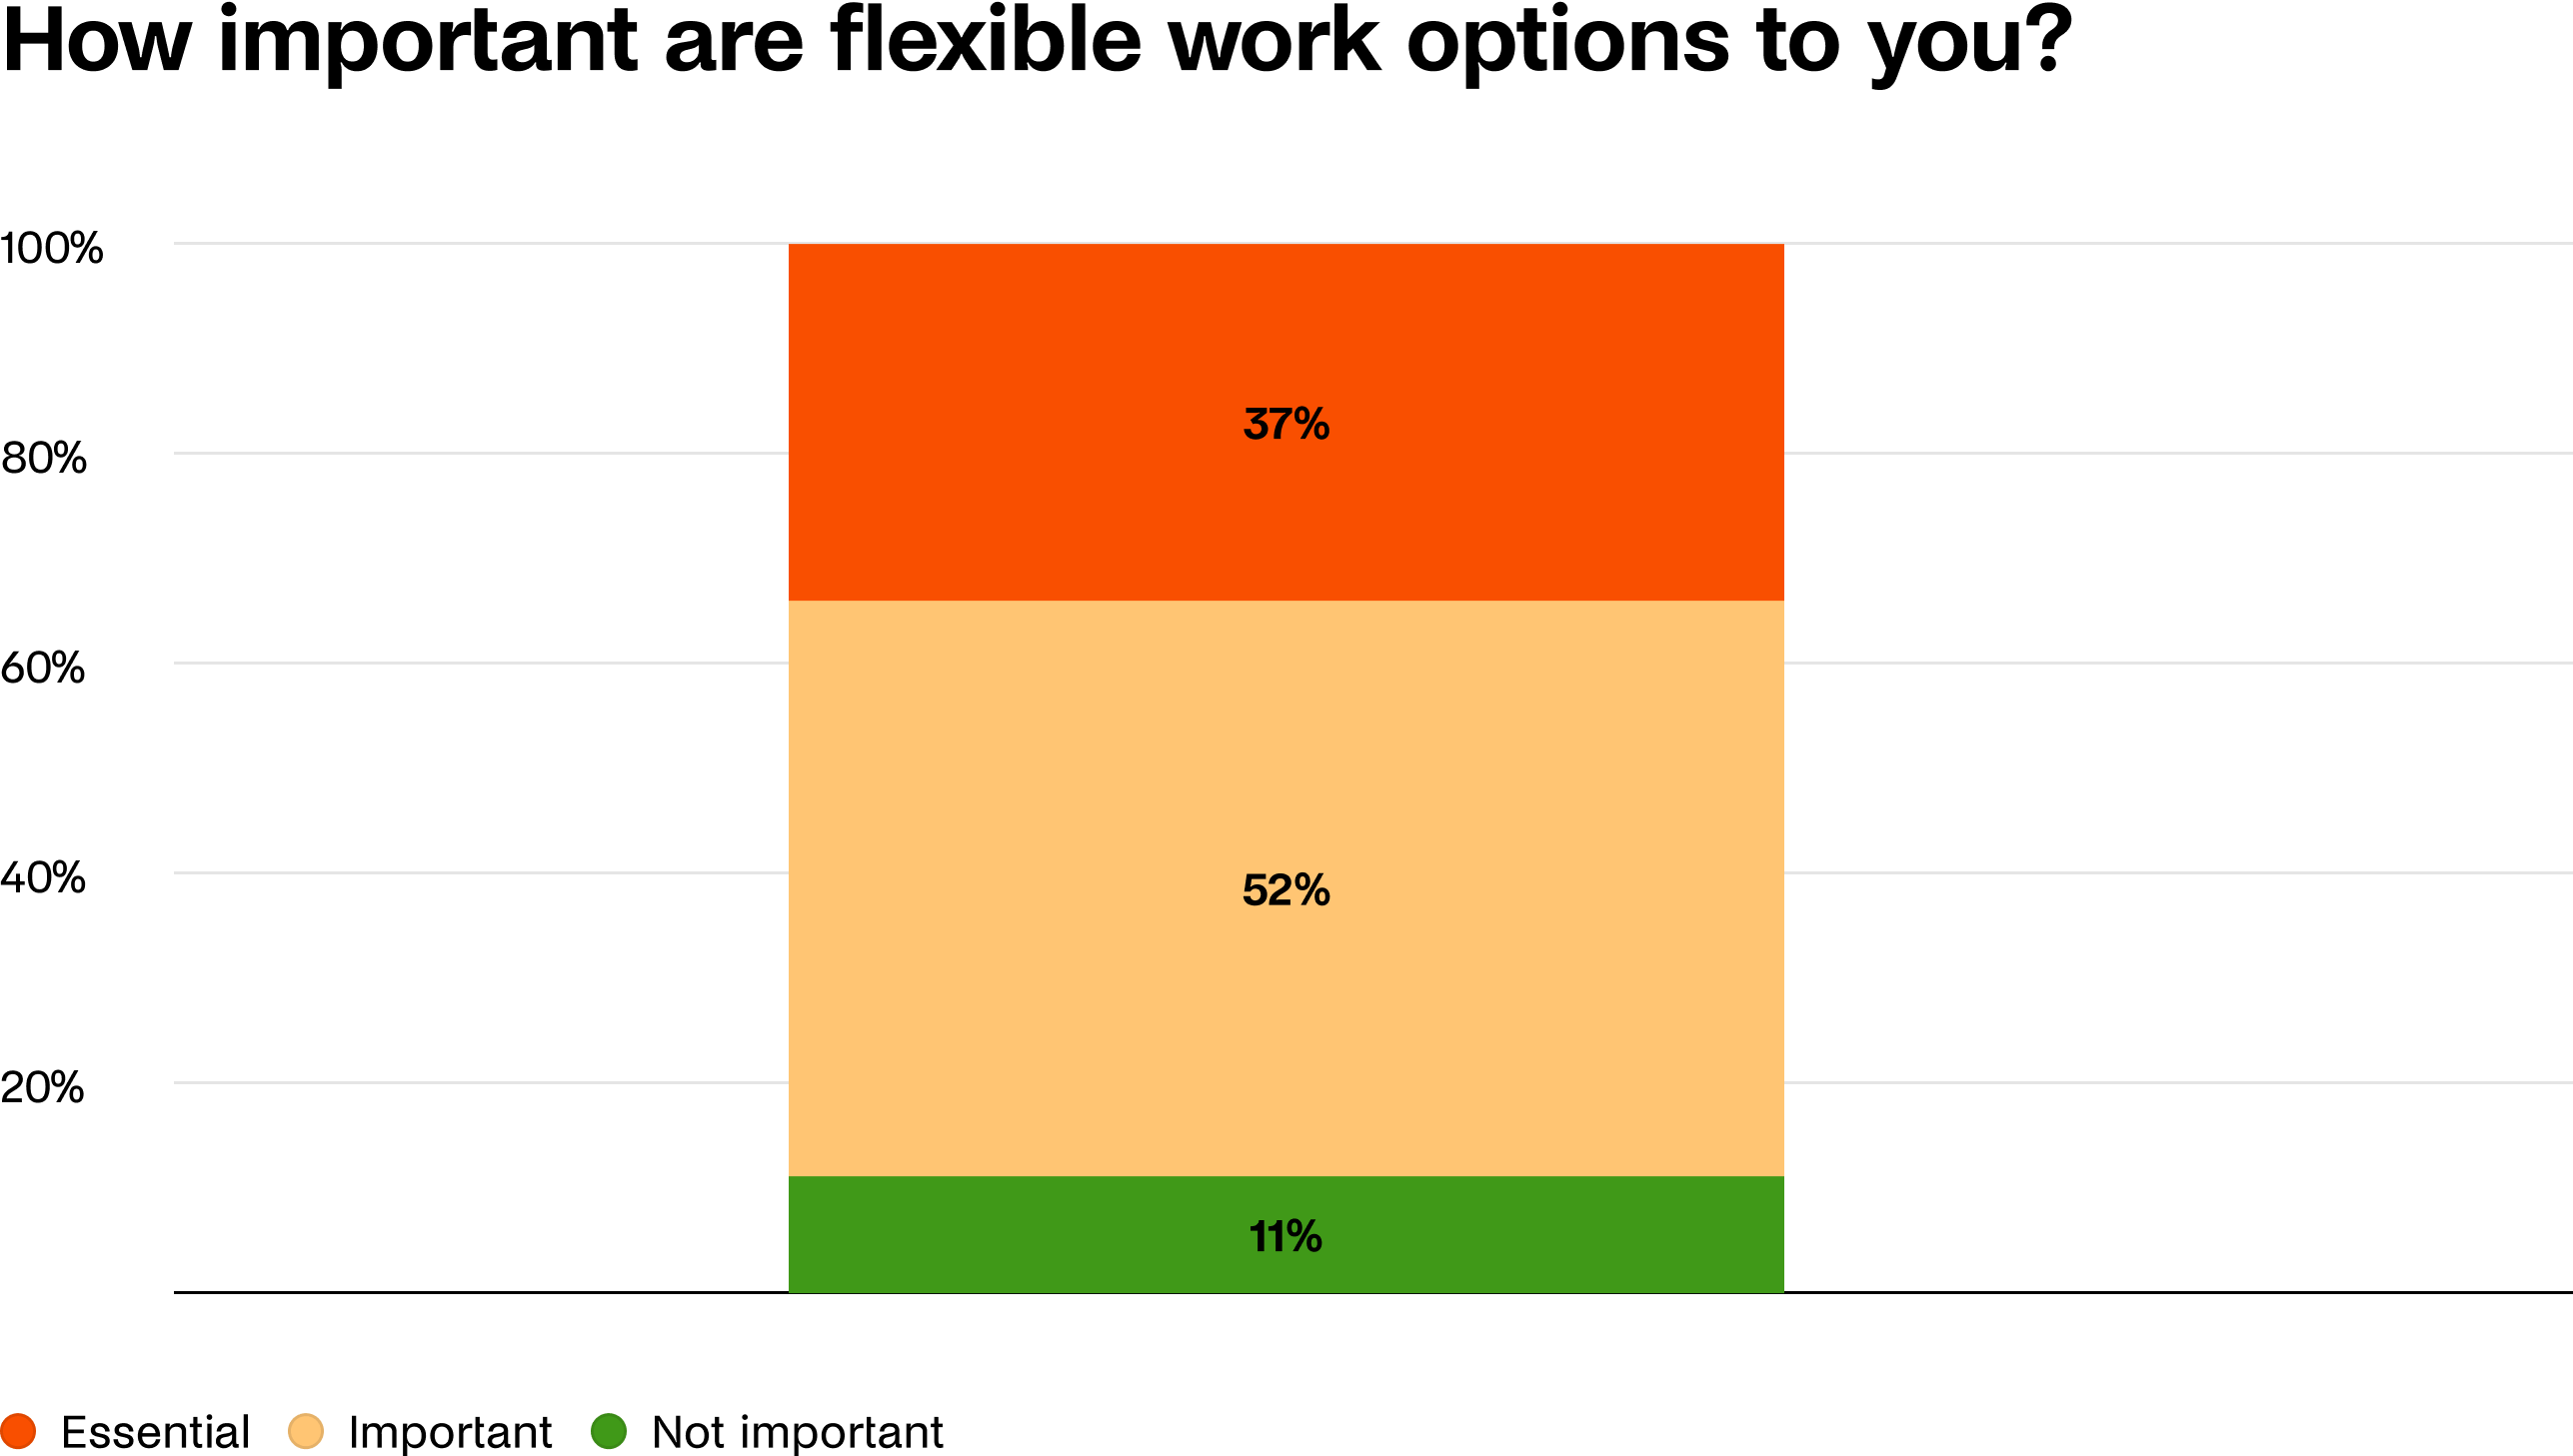 Chart: How important are flexible work options to you? 52% important, 37% essential, 11% not important